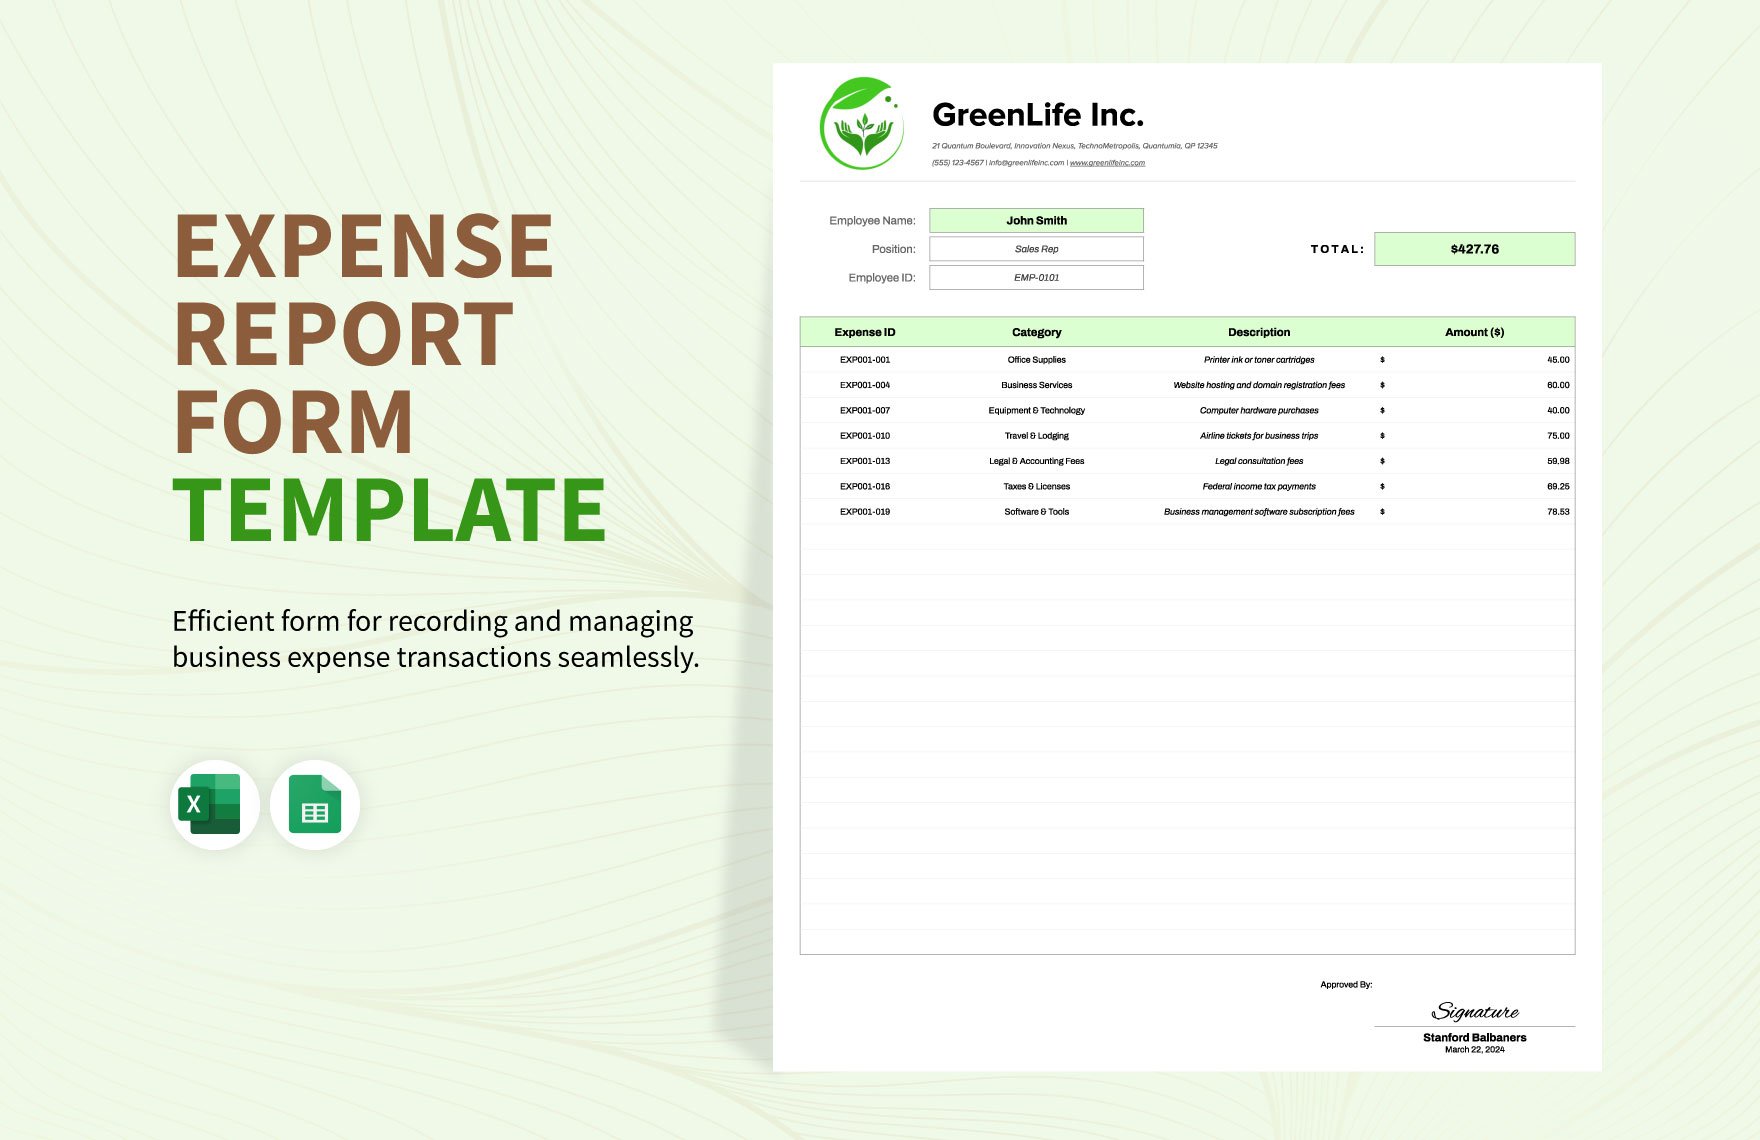 Expense Report Form Template in Excel, Google Sheets